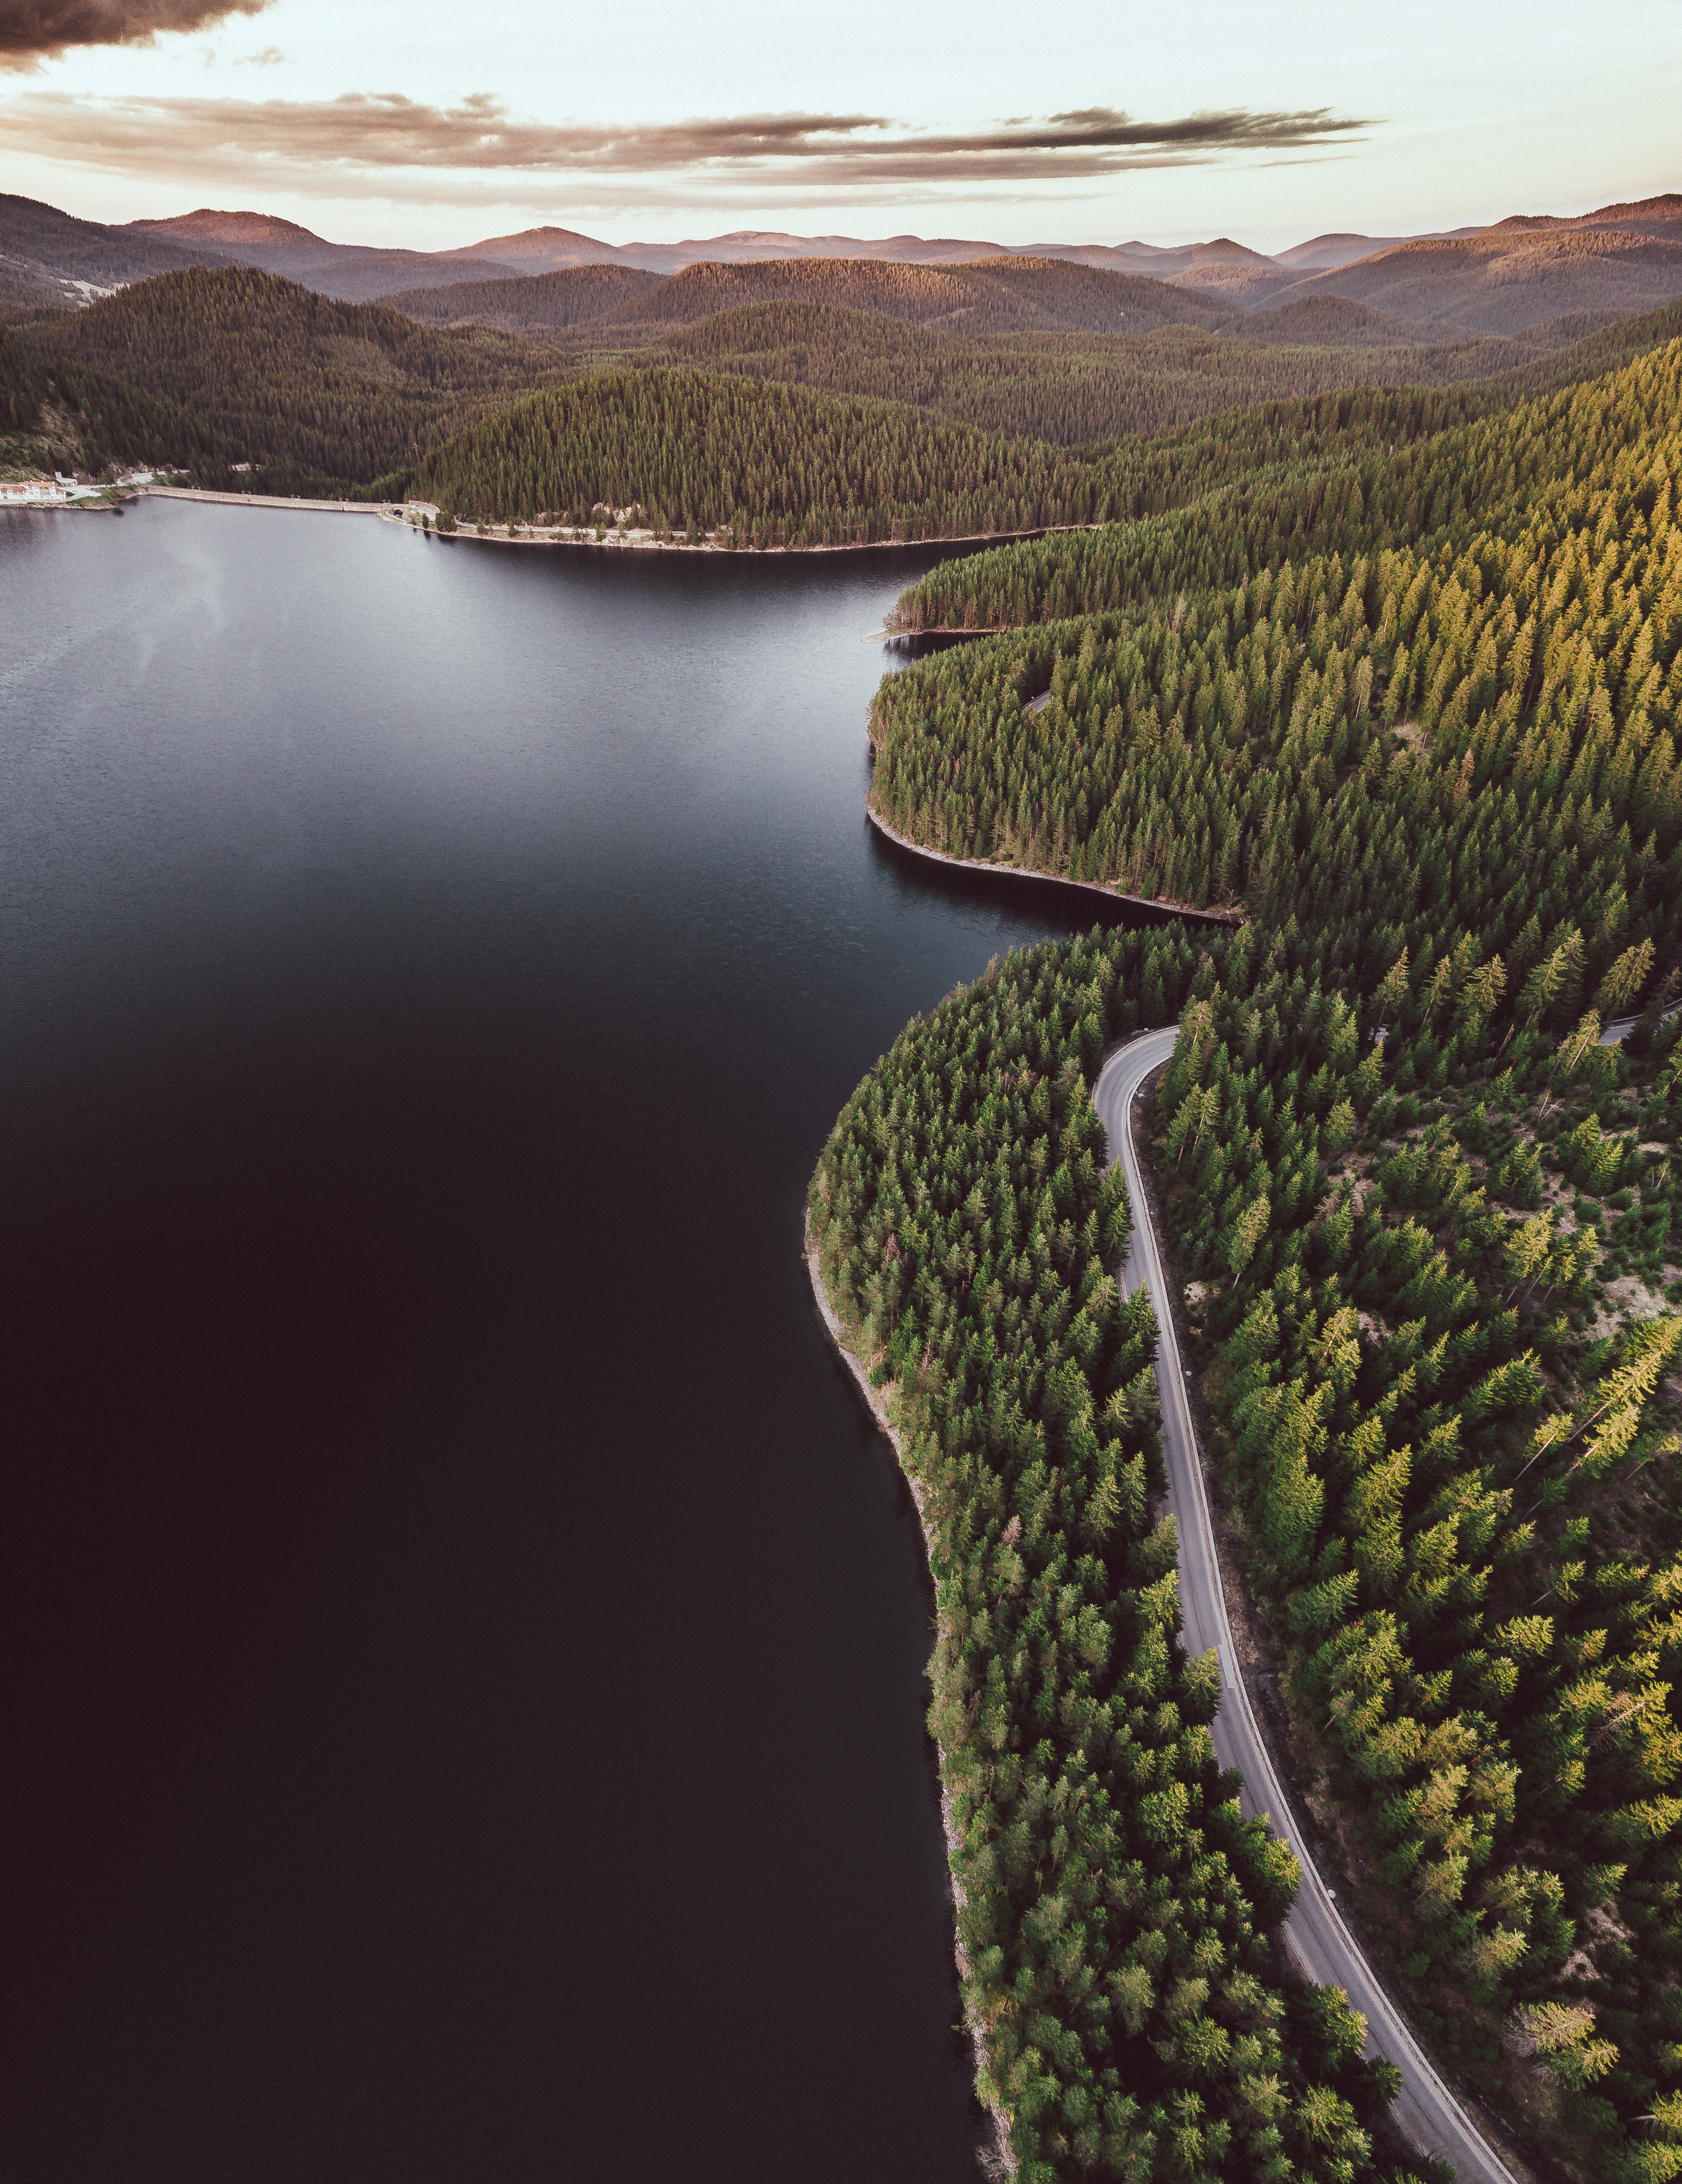 shore, nature, view from above, lake, bank, road, forest, hills